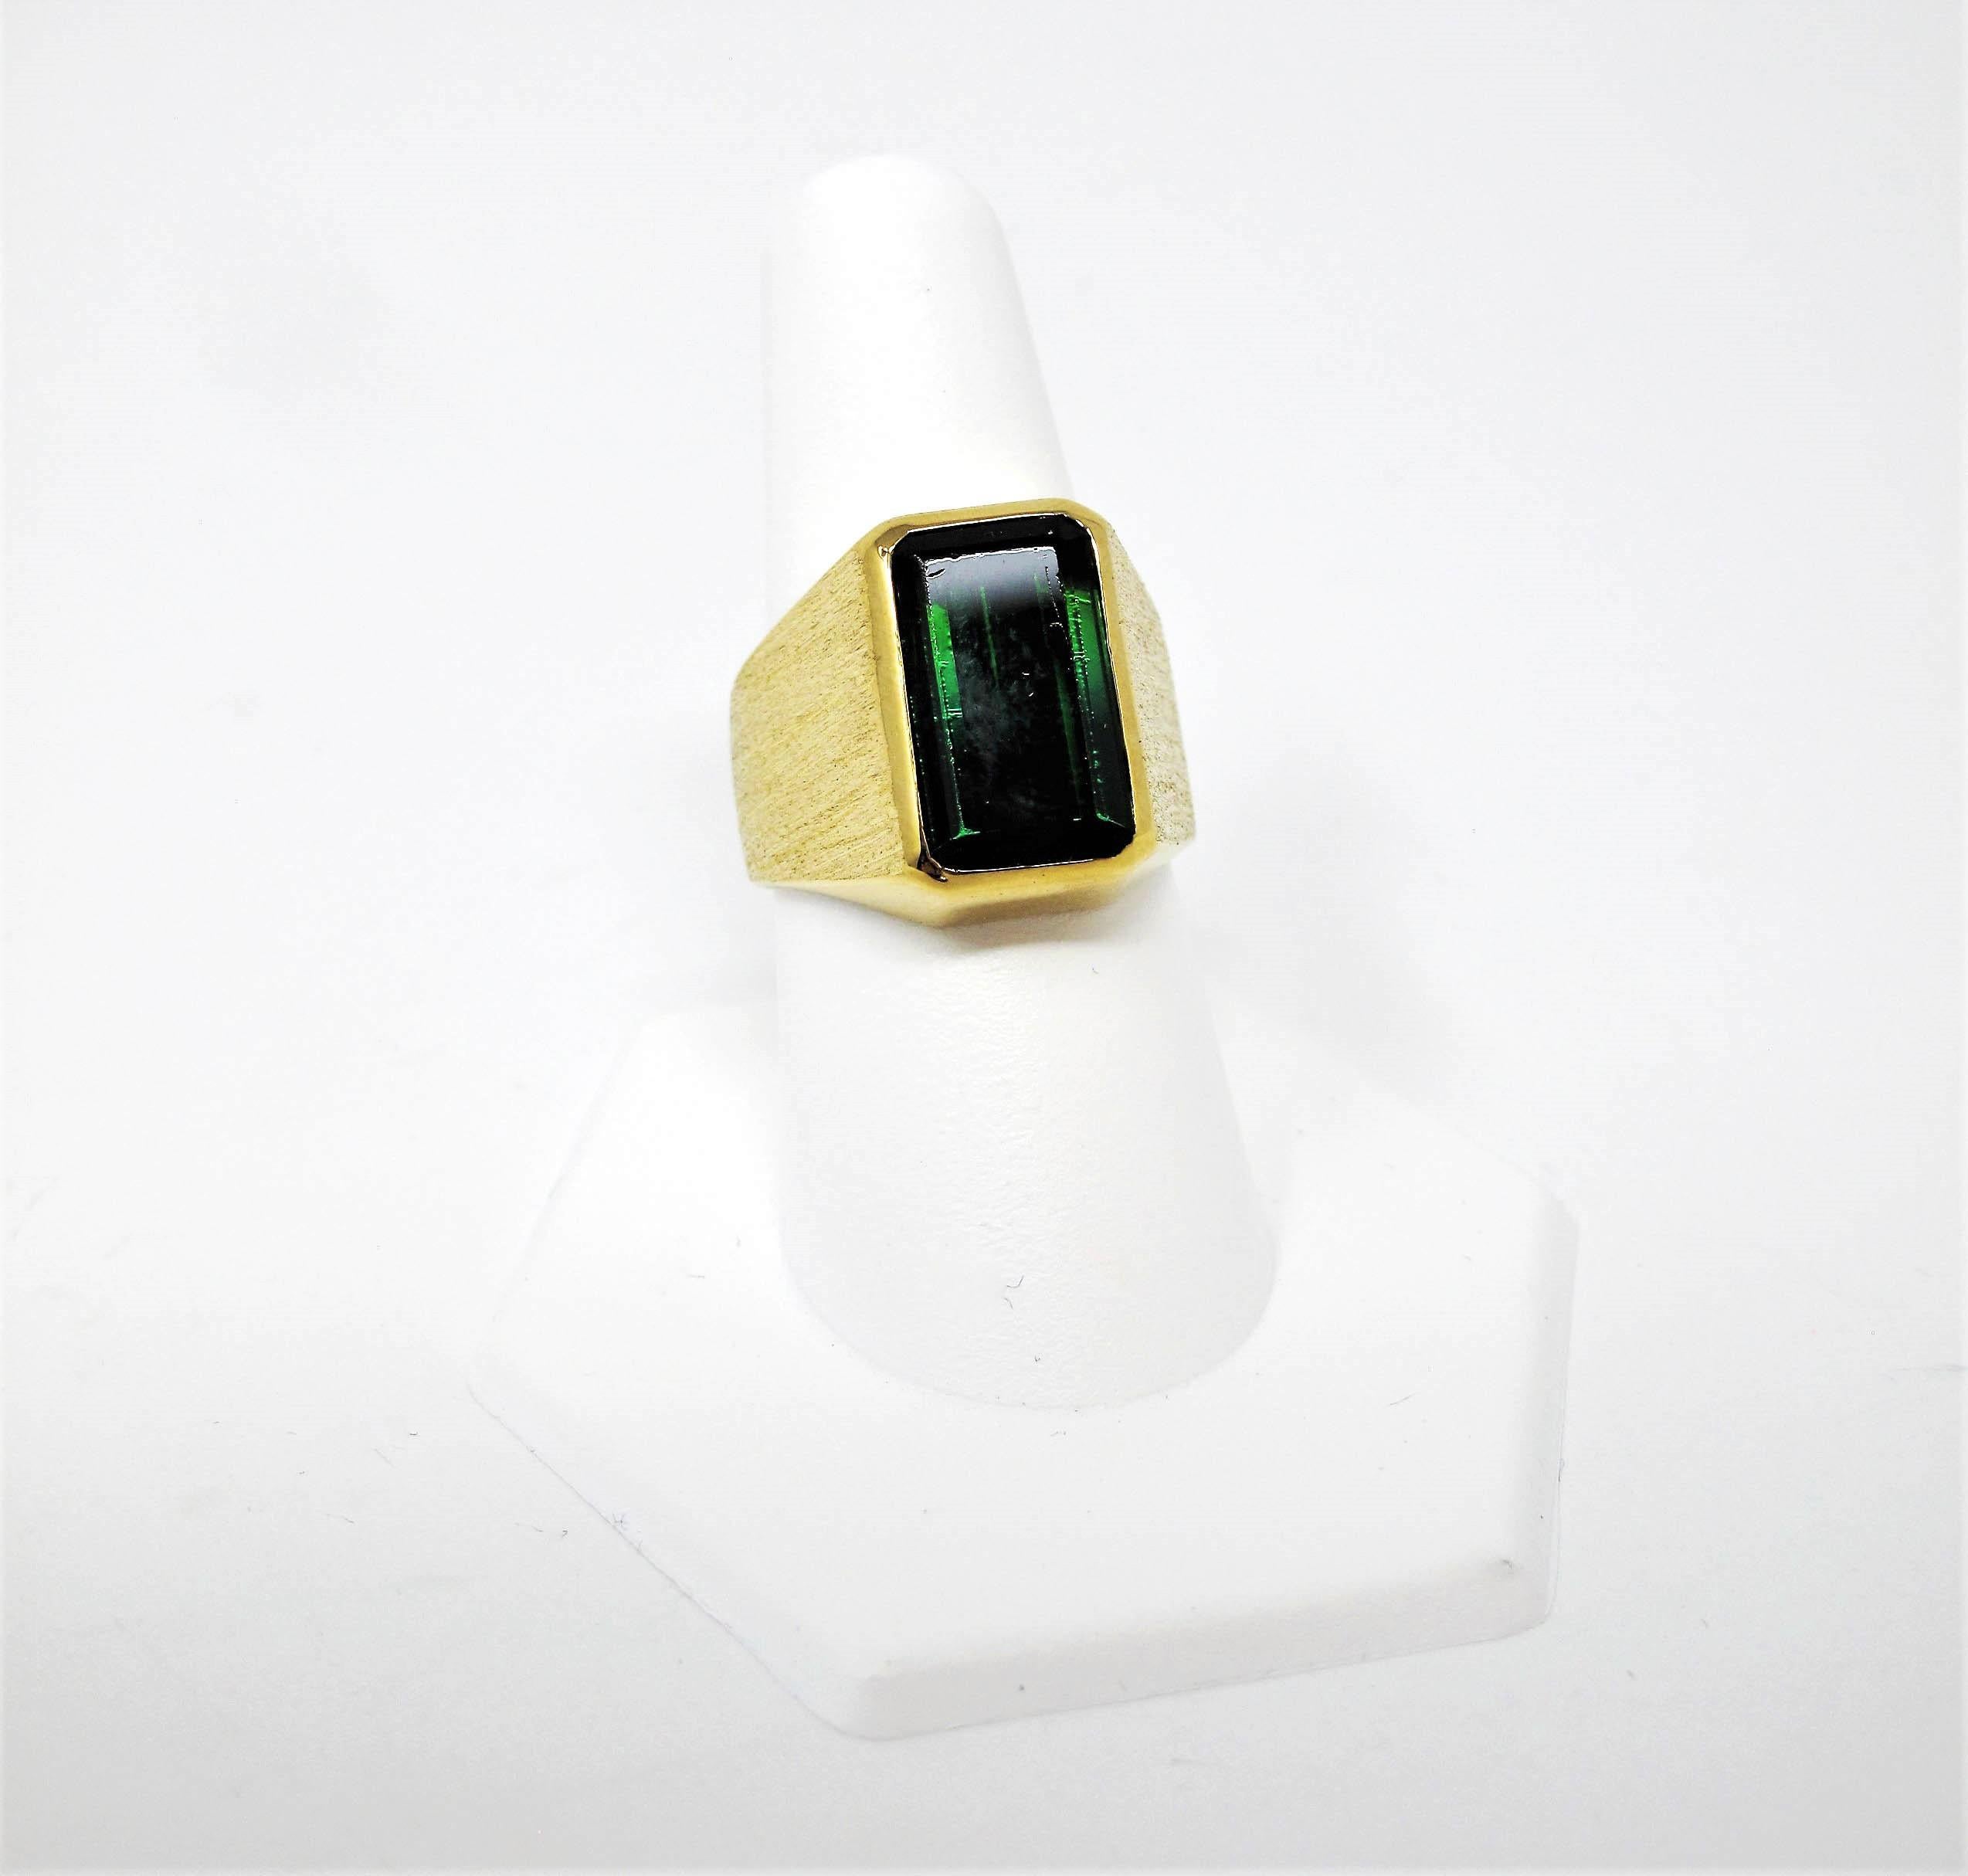 Incredible emerald cut green tourmaline signet style mens ring. This bold, handsome piece is contemporary in composition with its sleek design and clean features. The sizeable green gemstone really pops, while the heavily textured brushed gold band